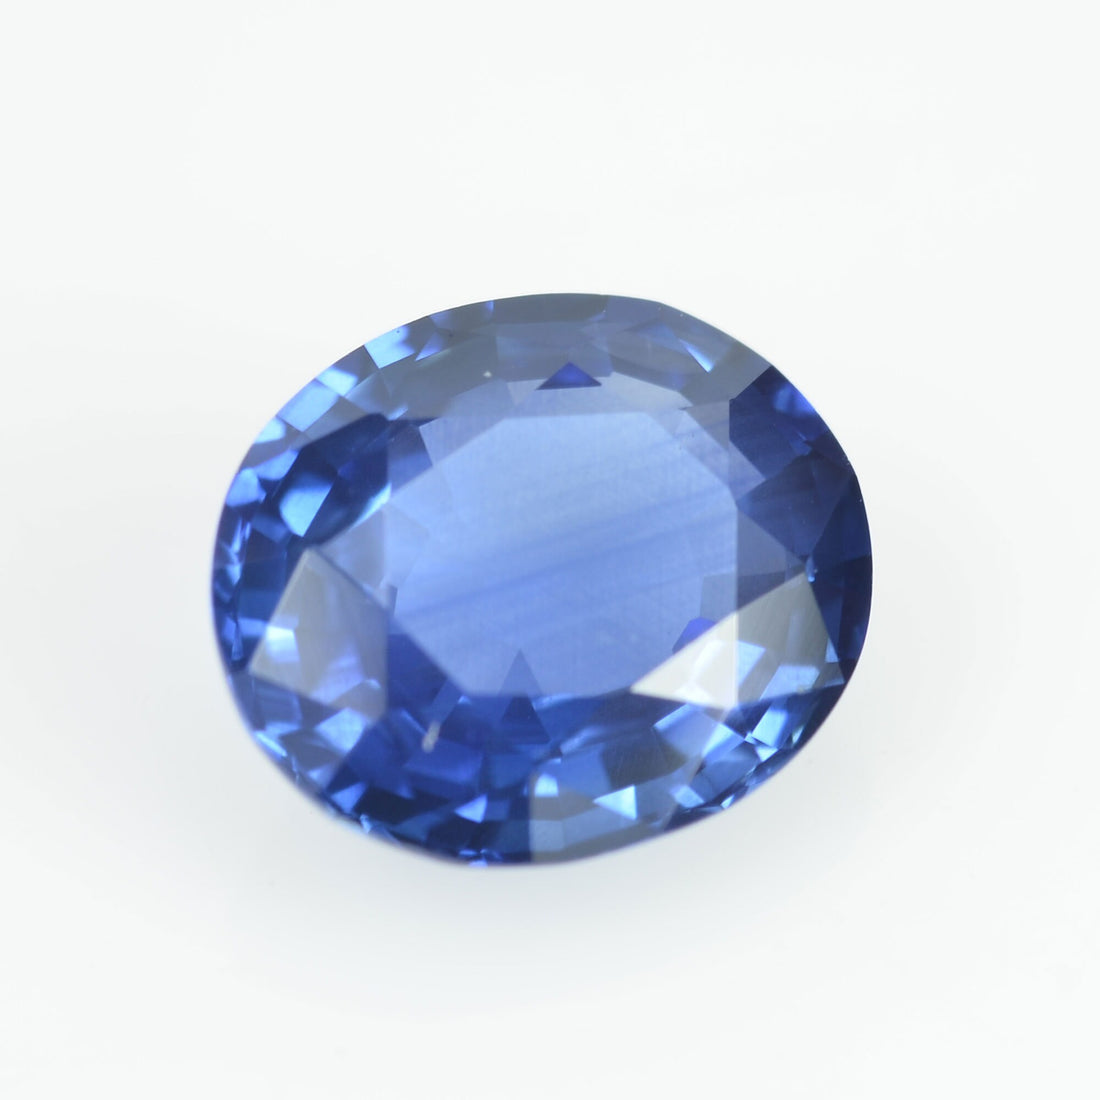 1.36 cts Natural Blue Sapphire Loose Gemstone Oval Cut